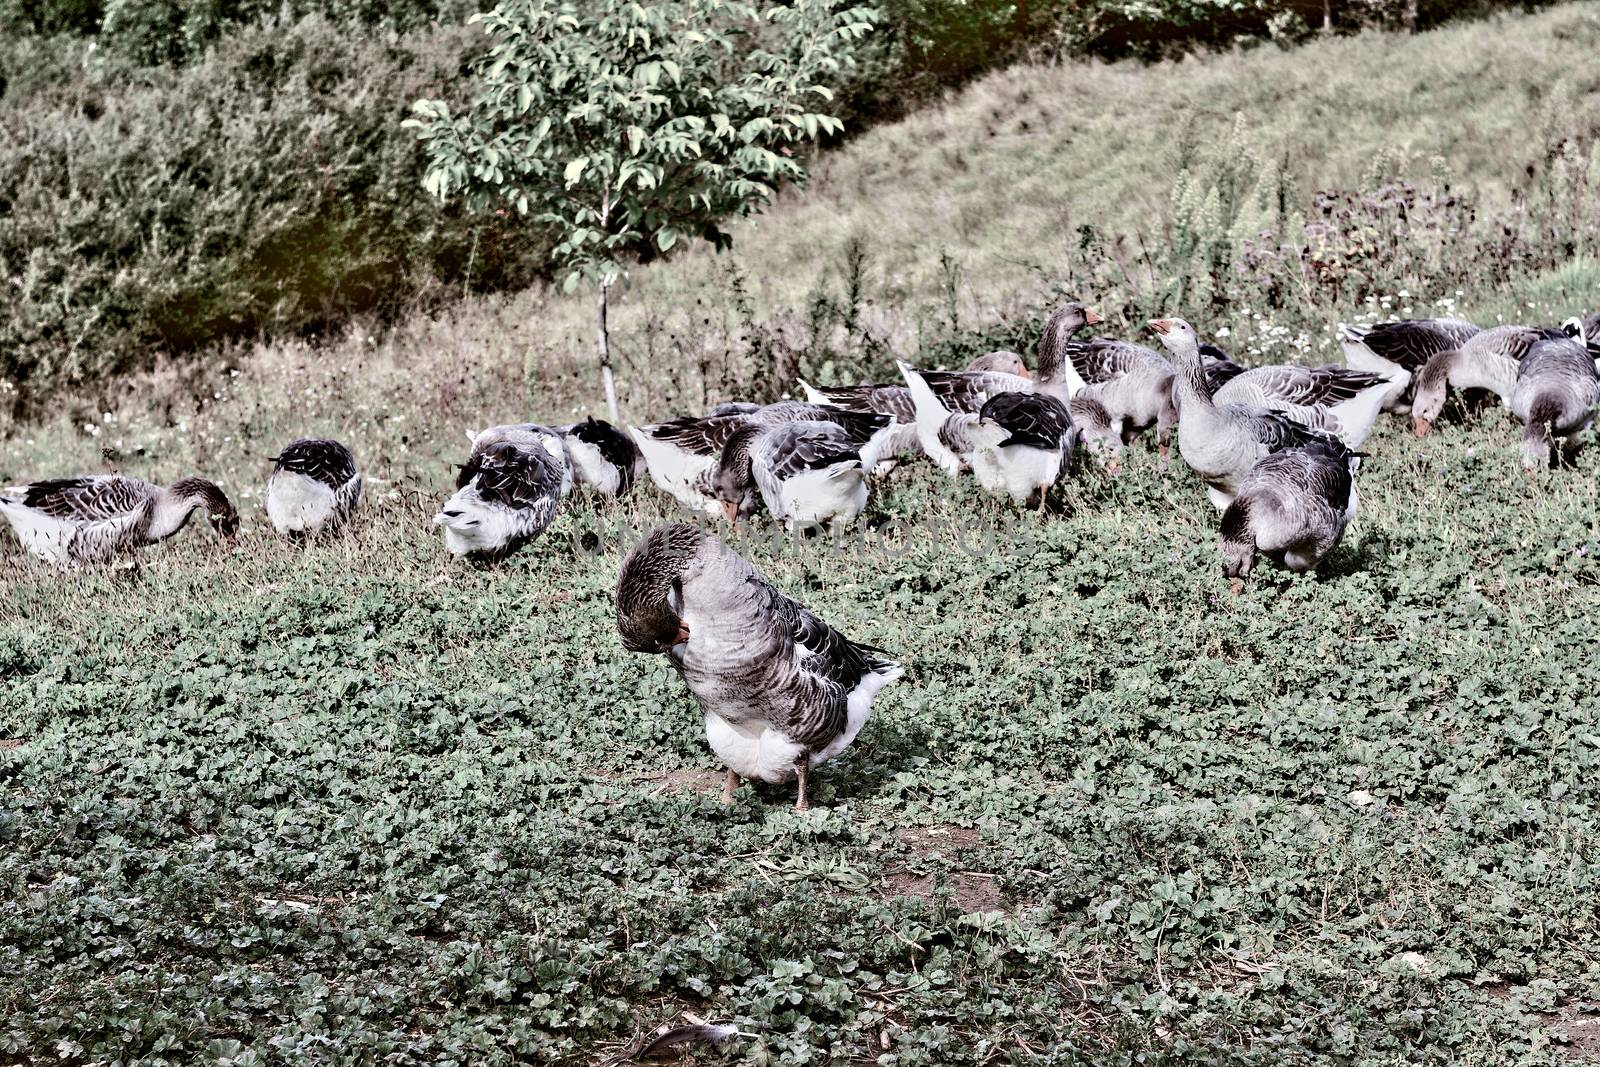 Geese Grazing on a Hillside in France, Retro Image Filtered Style